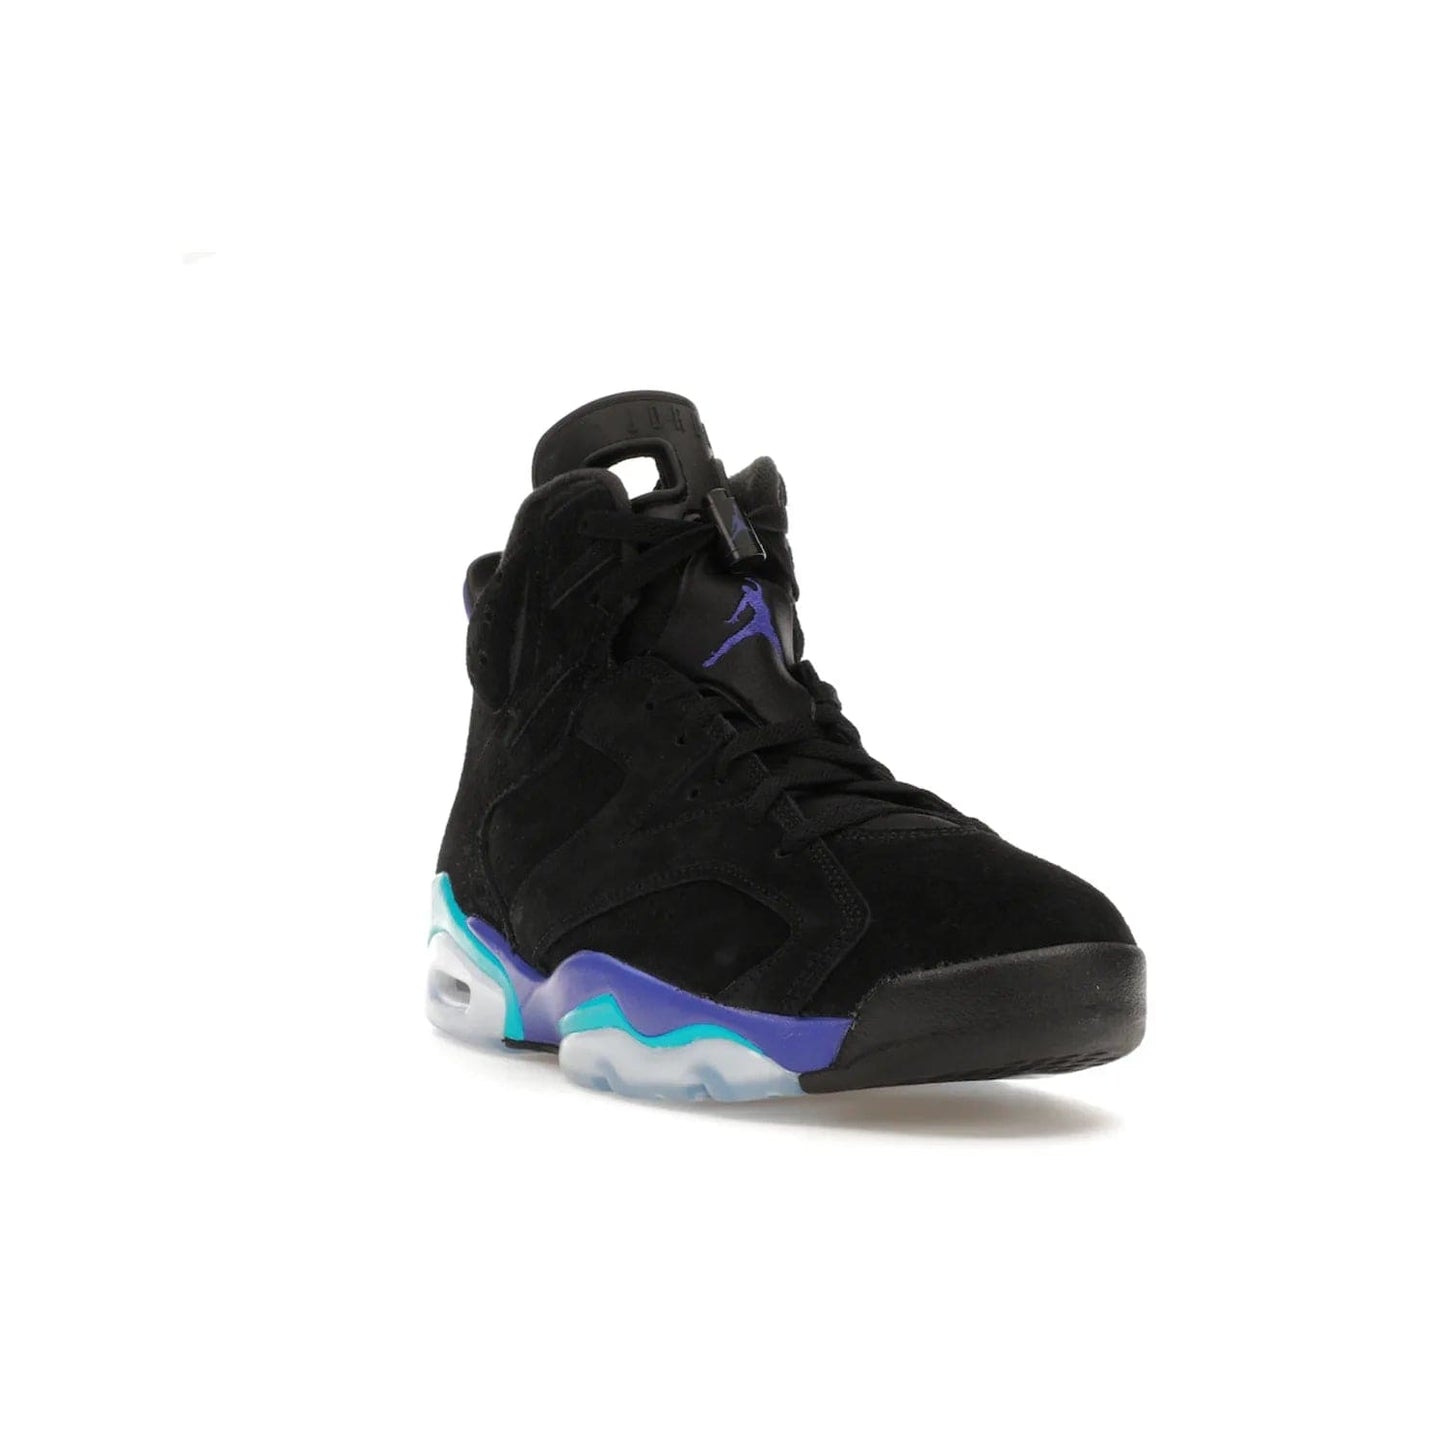 Jordan 6 Retro Aqua - Image 7 - Only at www.BallersClubKickz.com - Feel the classic Jordan 6 Retro Aqua paired with modern style. Black, Bright Concord, and Aquatone hues are crafted with a supple suede and rubberized heel tab. This standout sneaker adds signature Jordan elements at $200. Elevate your style with the Jordan 6 Retro Aqua.